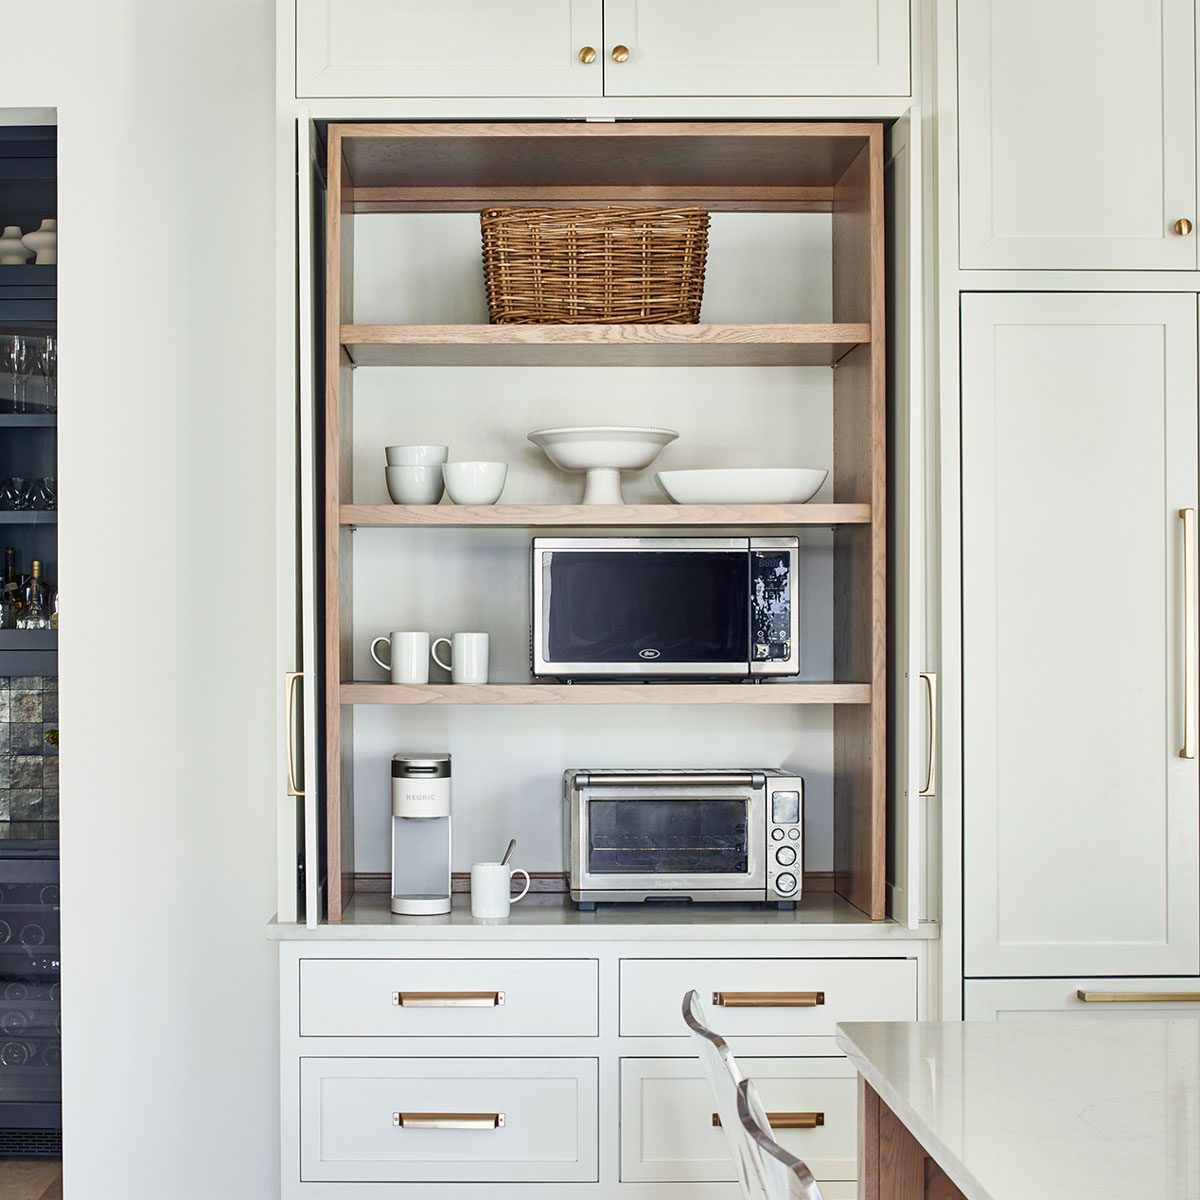 https://www.rd.com/wp-content/uploads/2023/10/RD-Why-an-Appliance-Garage-Might-Be-the-Organizing-Secret-Your-Kitchen-Needs_Courtesy-Marc-Mauldin-Photography_ElleDuMonde_1029WindingBranchLn_033022_MMP_99558_KSedit-FT.jpg?fit=700%2C1024